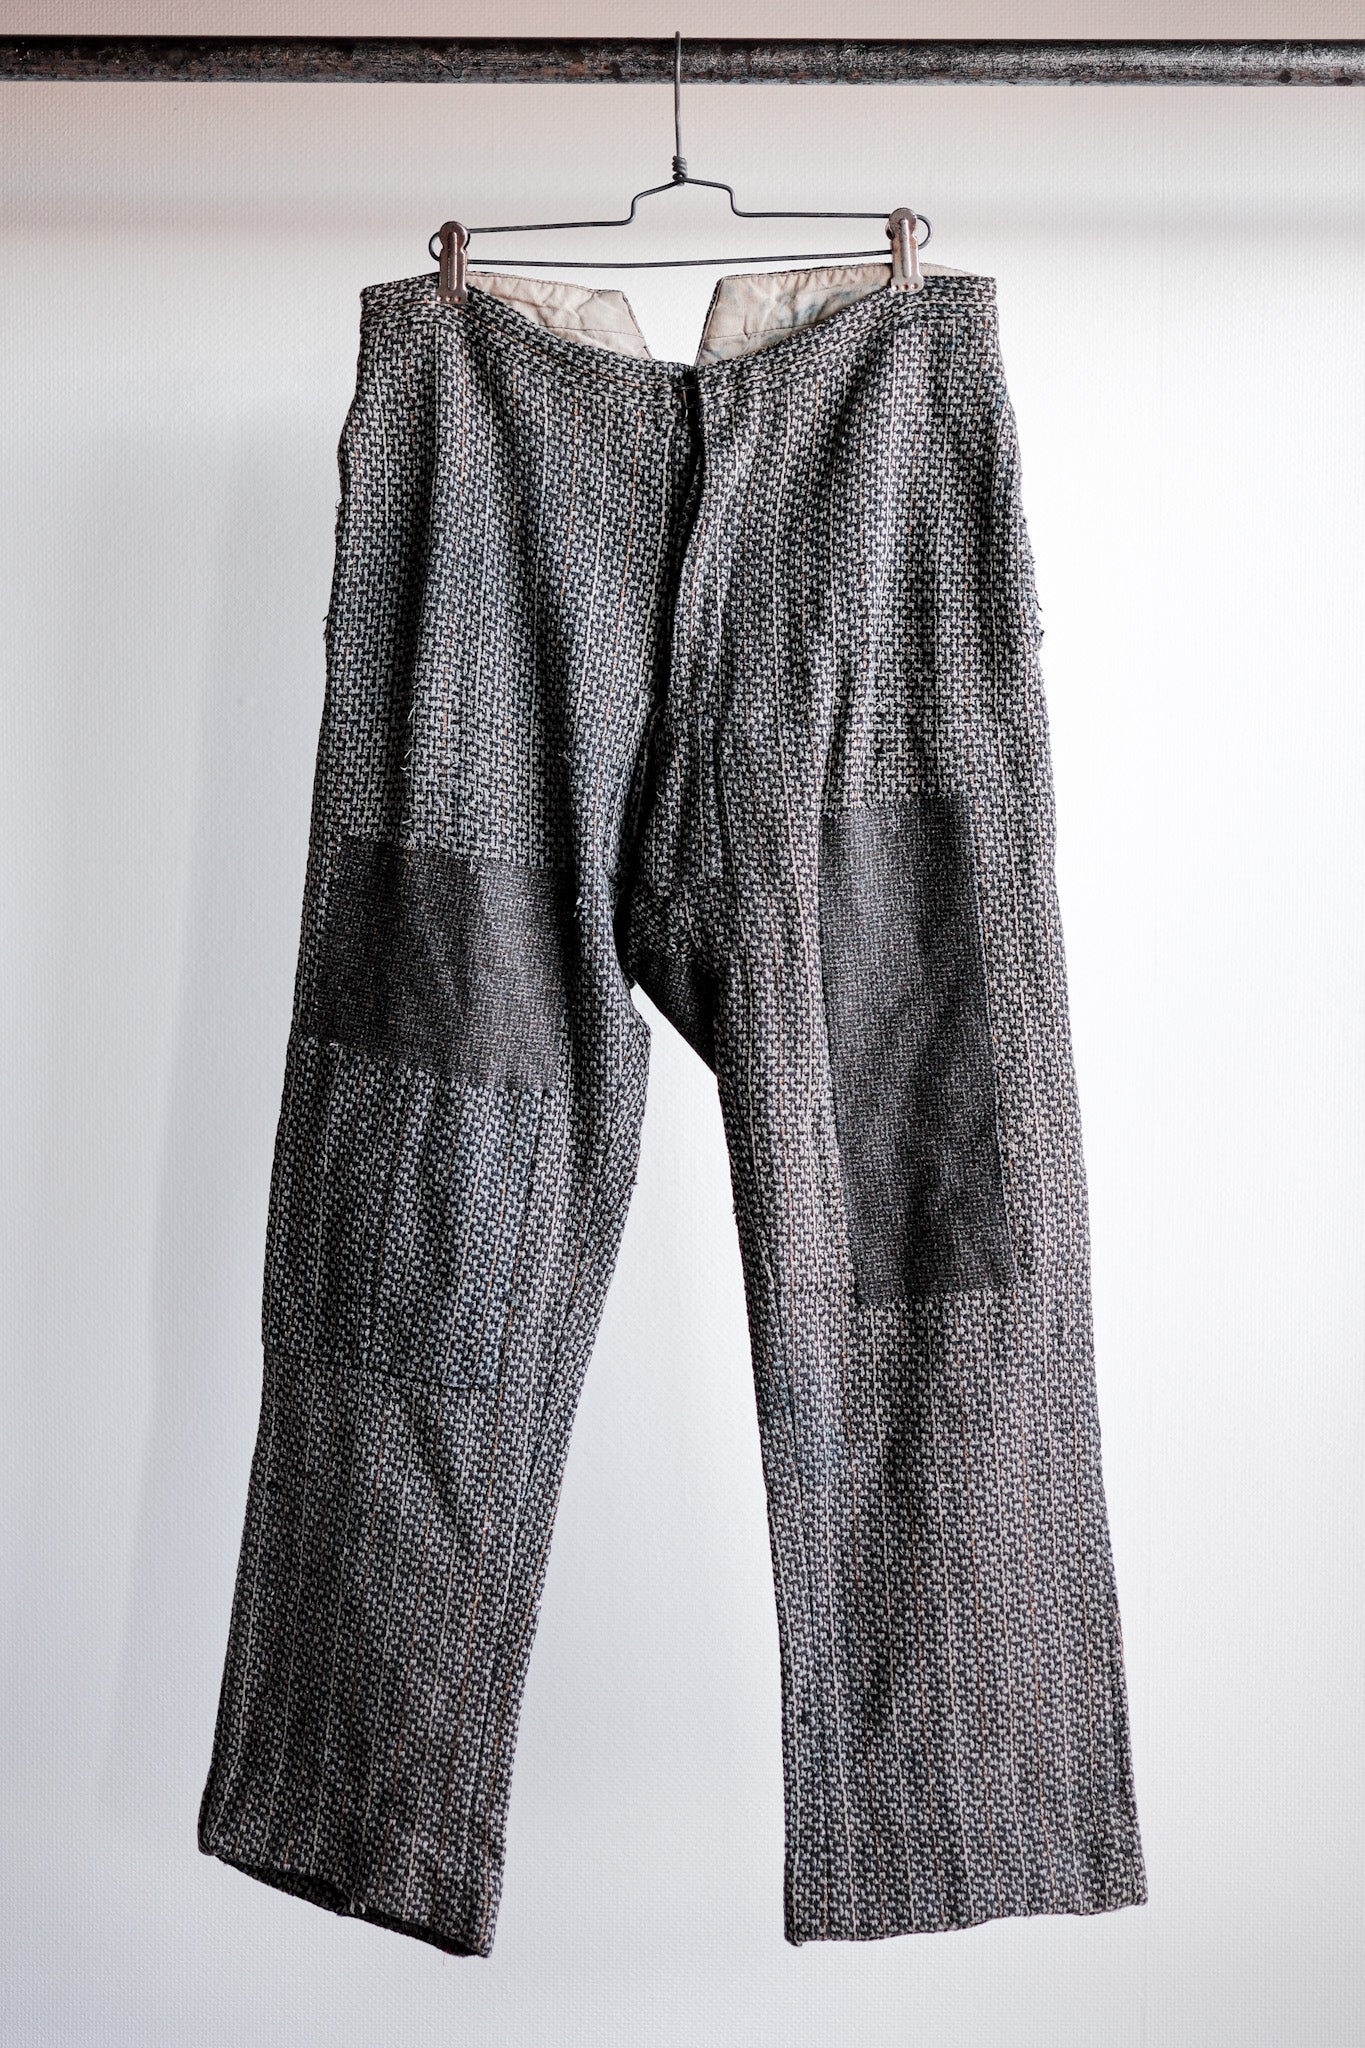 【~20's】French Vintage Homemade Wool Work Pants "Patchwork"